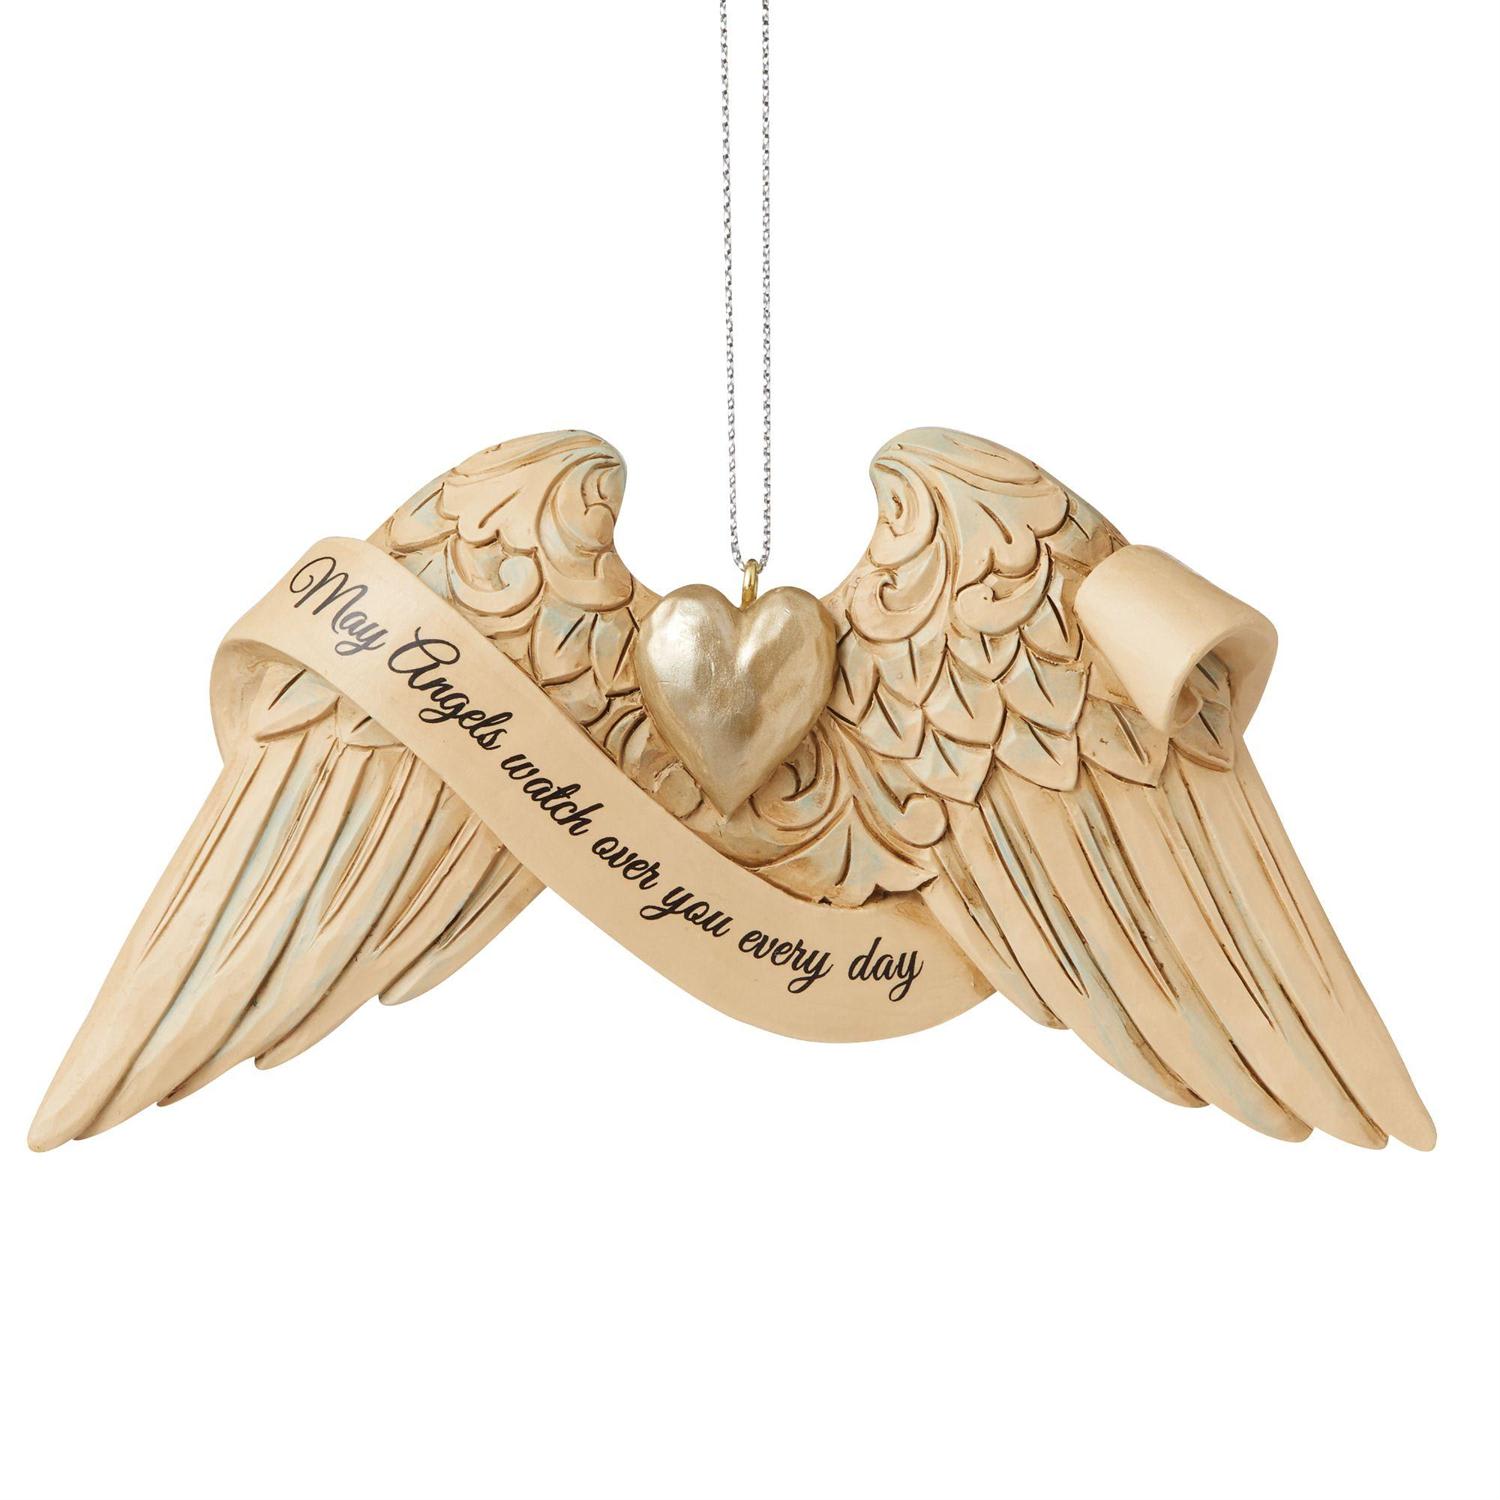 Jim Shore -  Guardian Angel Wings Ornament - These delicately sculpted handpainted angel wings share uplifting messages of faith when we need a reminder. Keep these wings close to remember to find comfort. This pair of Jim Shore angel wings shares a heartfelt message about guardian angels near.  Message: May Angels watch over you every day. Hanging Ornament 2.5in H Jim Shore Heartwood Creek Heavenly Messengers Ornaments hang on tree or on a stand in your home thoroughout the year Beautifully hand-painted and crafted from high-quality stone resin with intricate styling and attention to detail Beautiful Jim Shore Angel Wings share messages of love, hope and inspiration to lift our spirits and bring us peace. Packaged in window box 4.75 in L